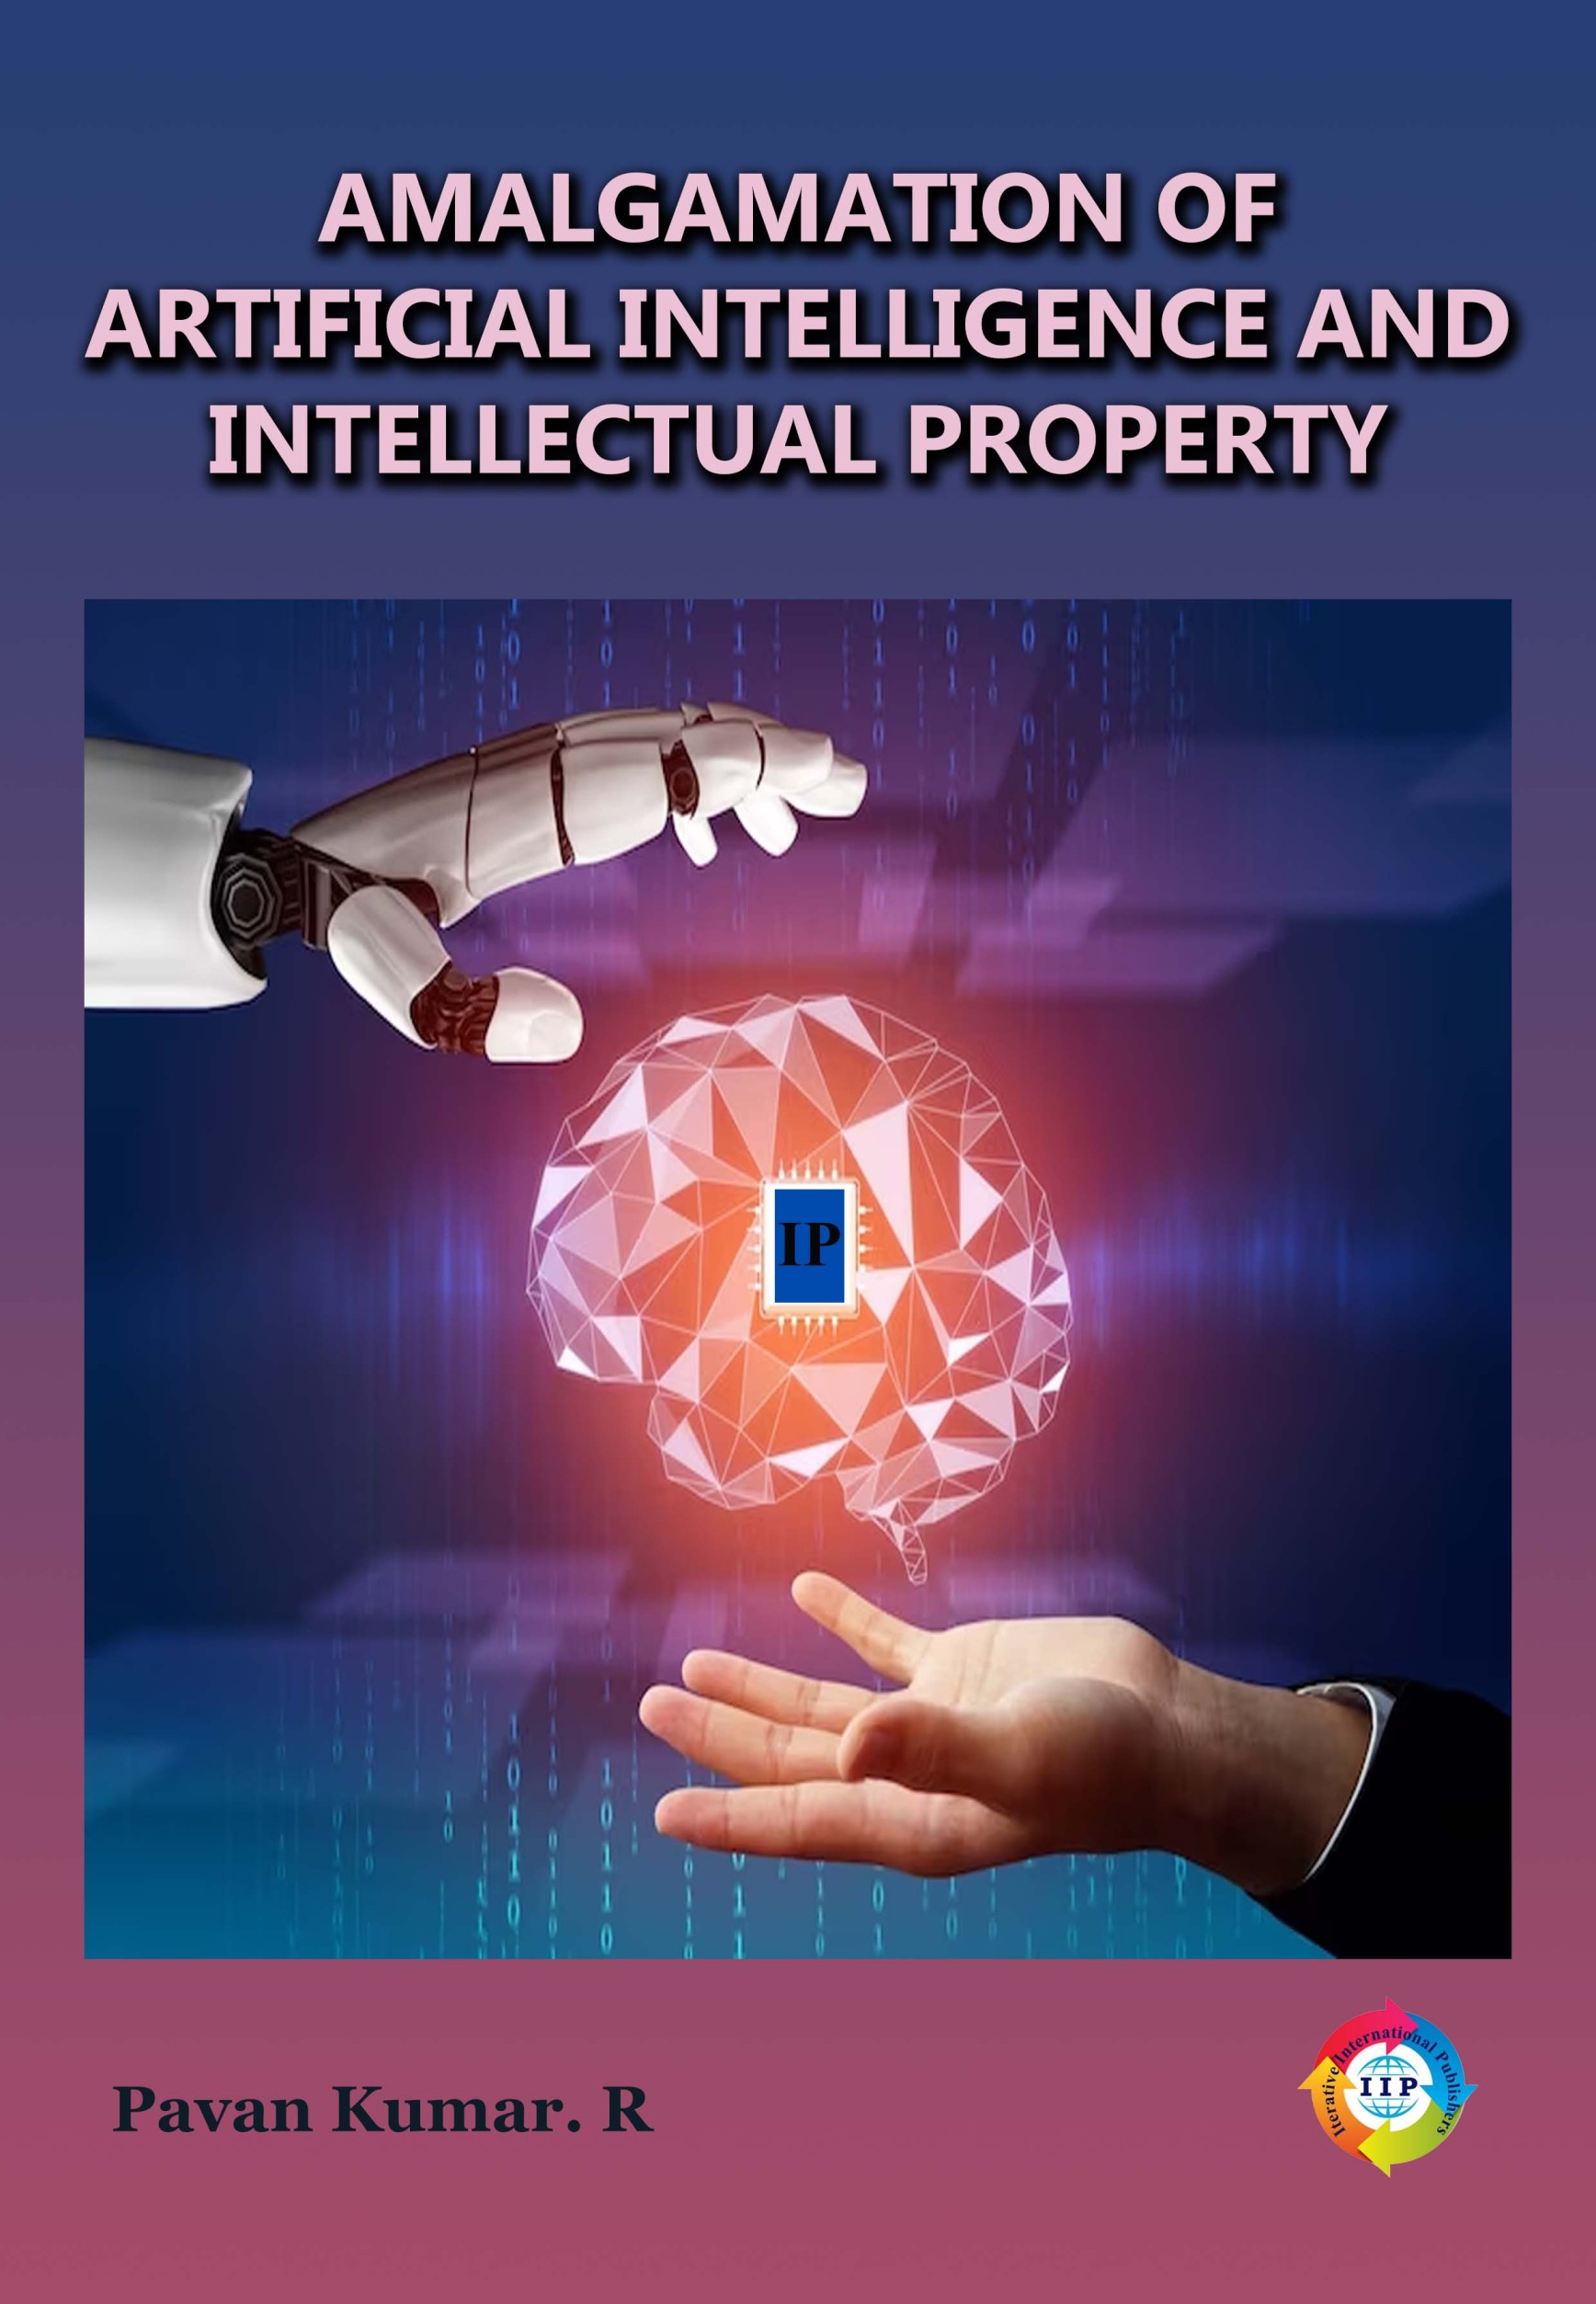 AMALGAMATION OF ARTIFICIAL INTELLIGENCE AND INTELLECTUAL PROPERTY